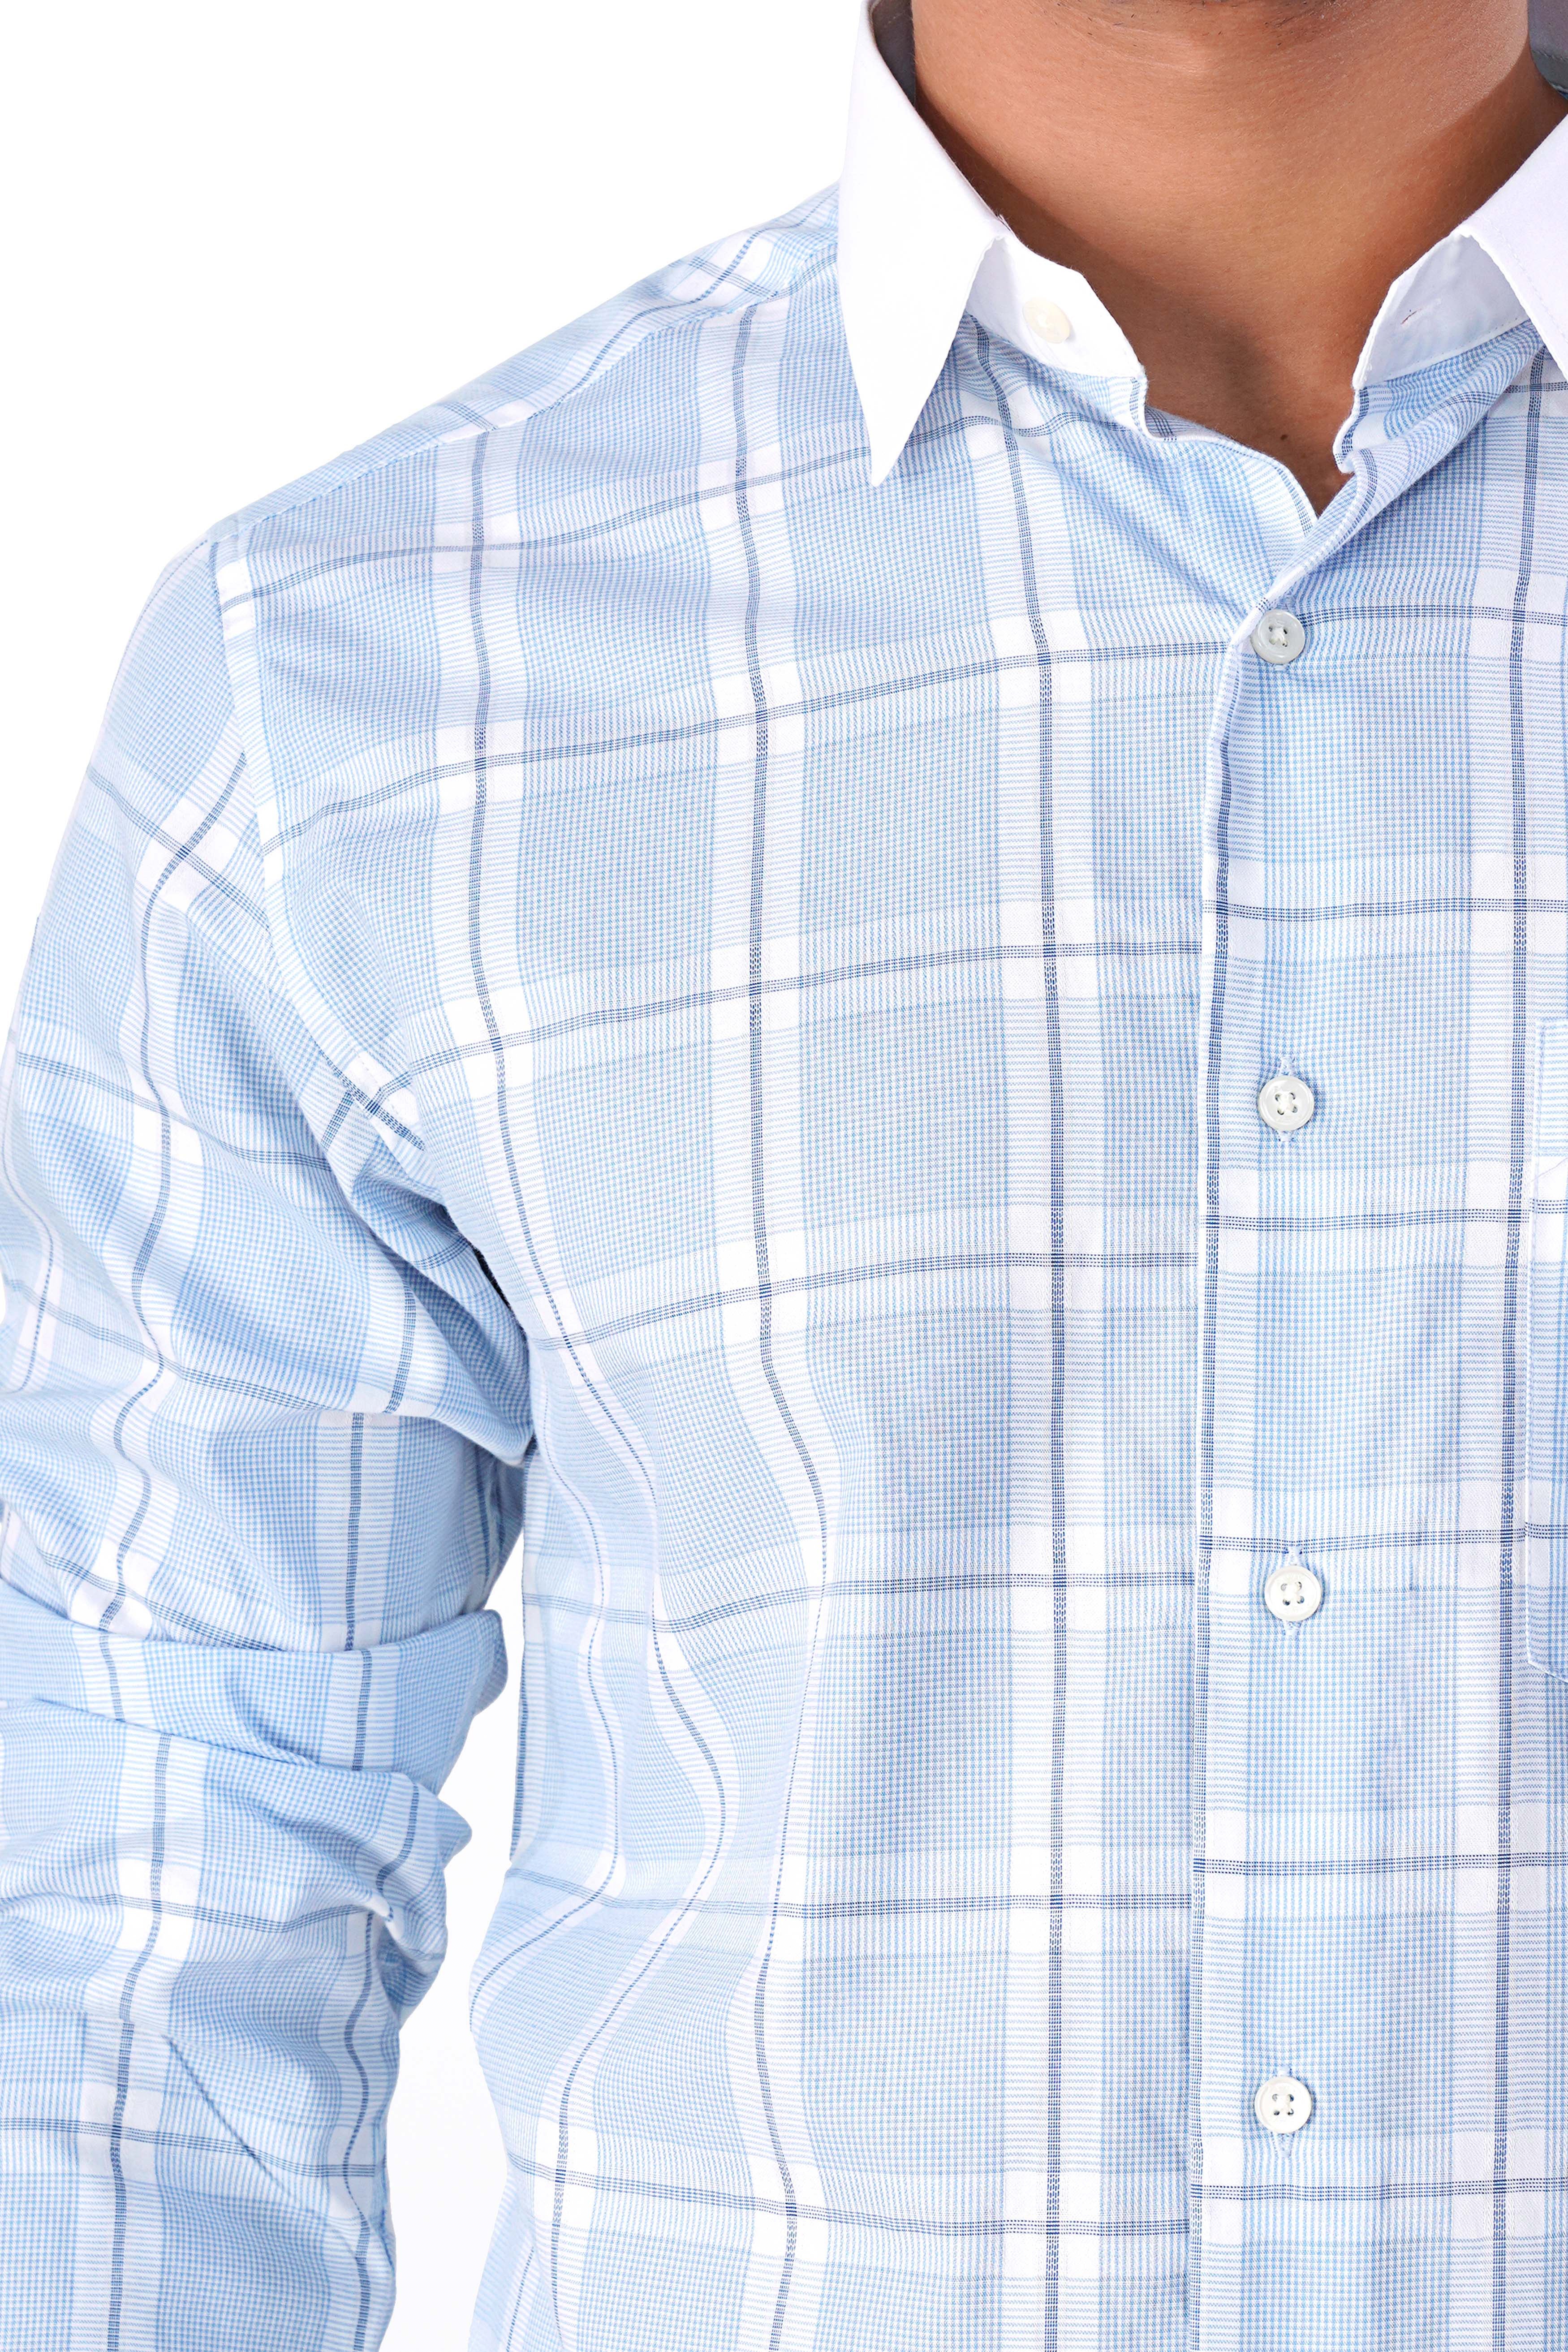 Glacier Blue and White Plaid with White Cuffs and Collar Dobby Textured Premium Giza Cotton Shirt